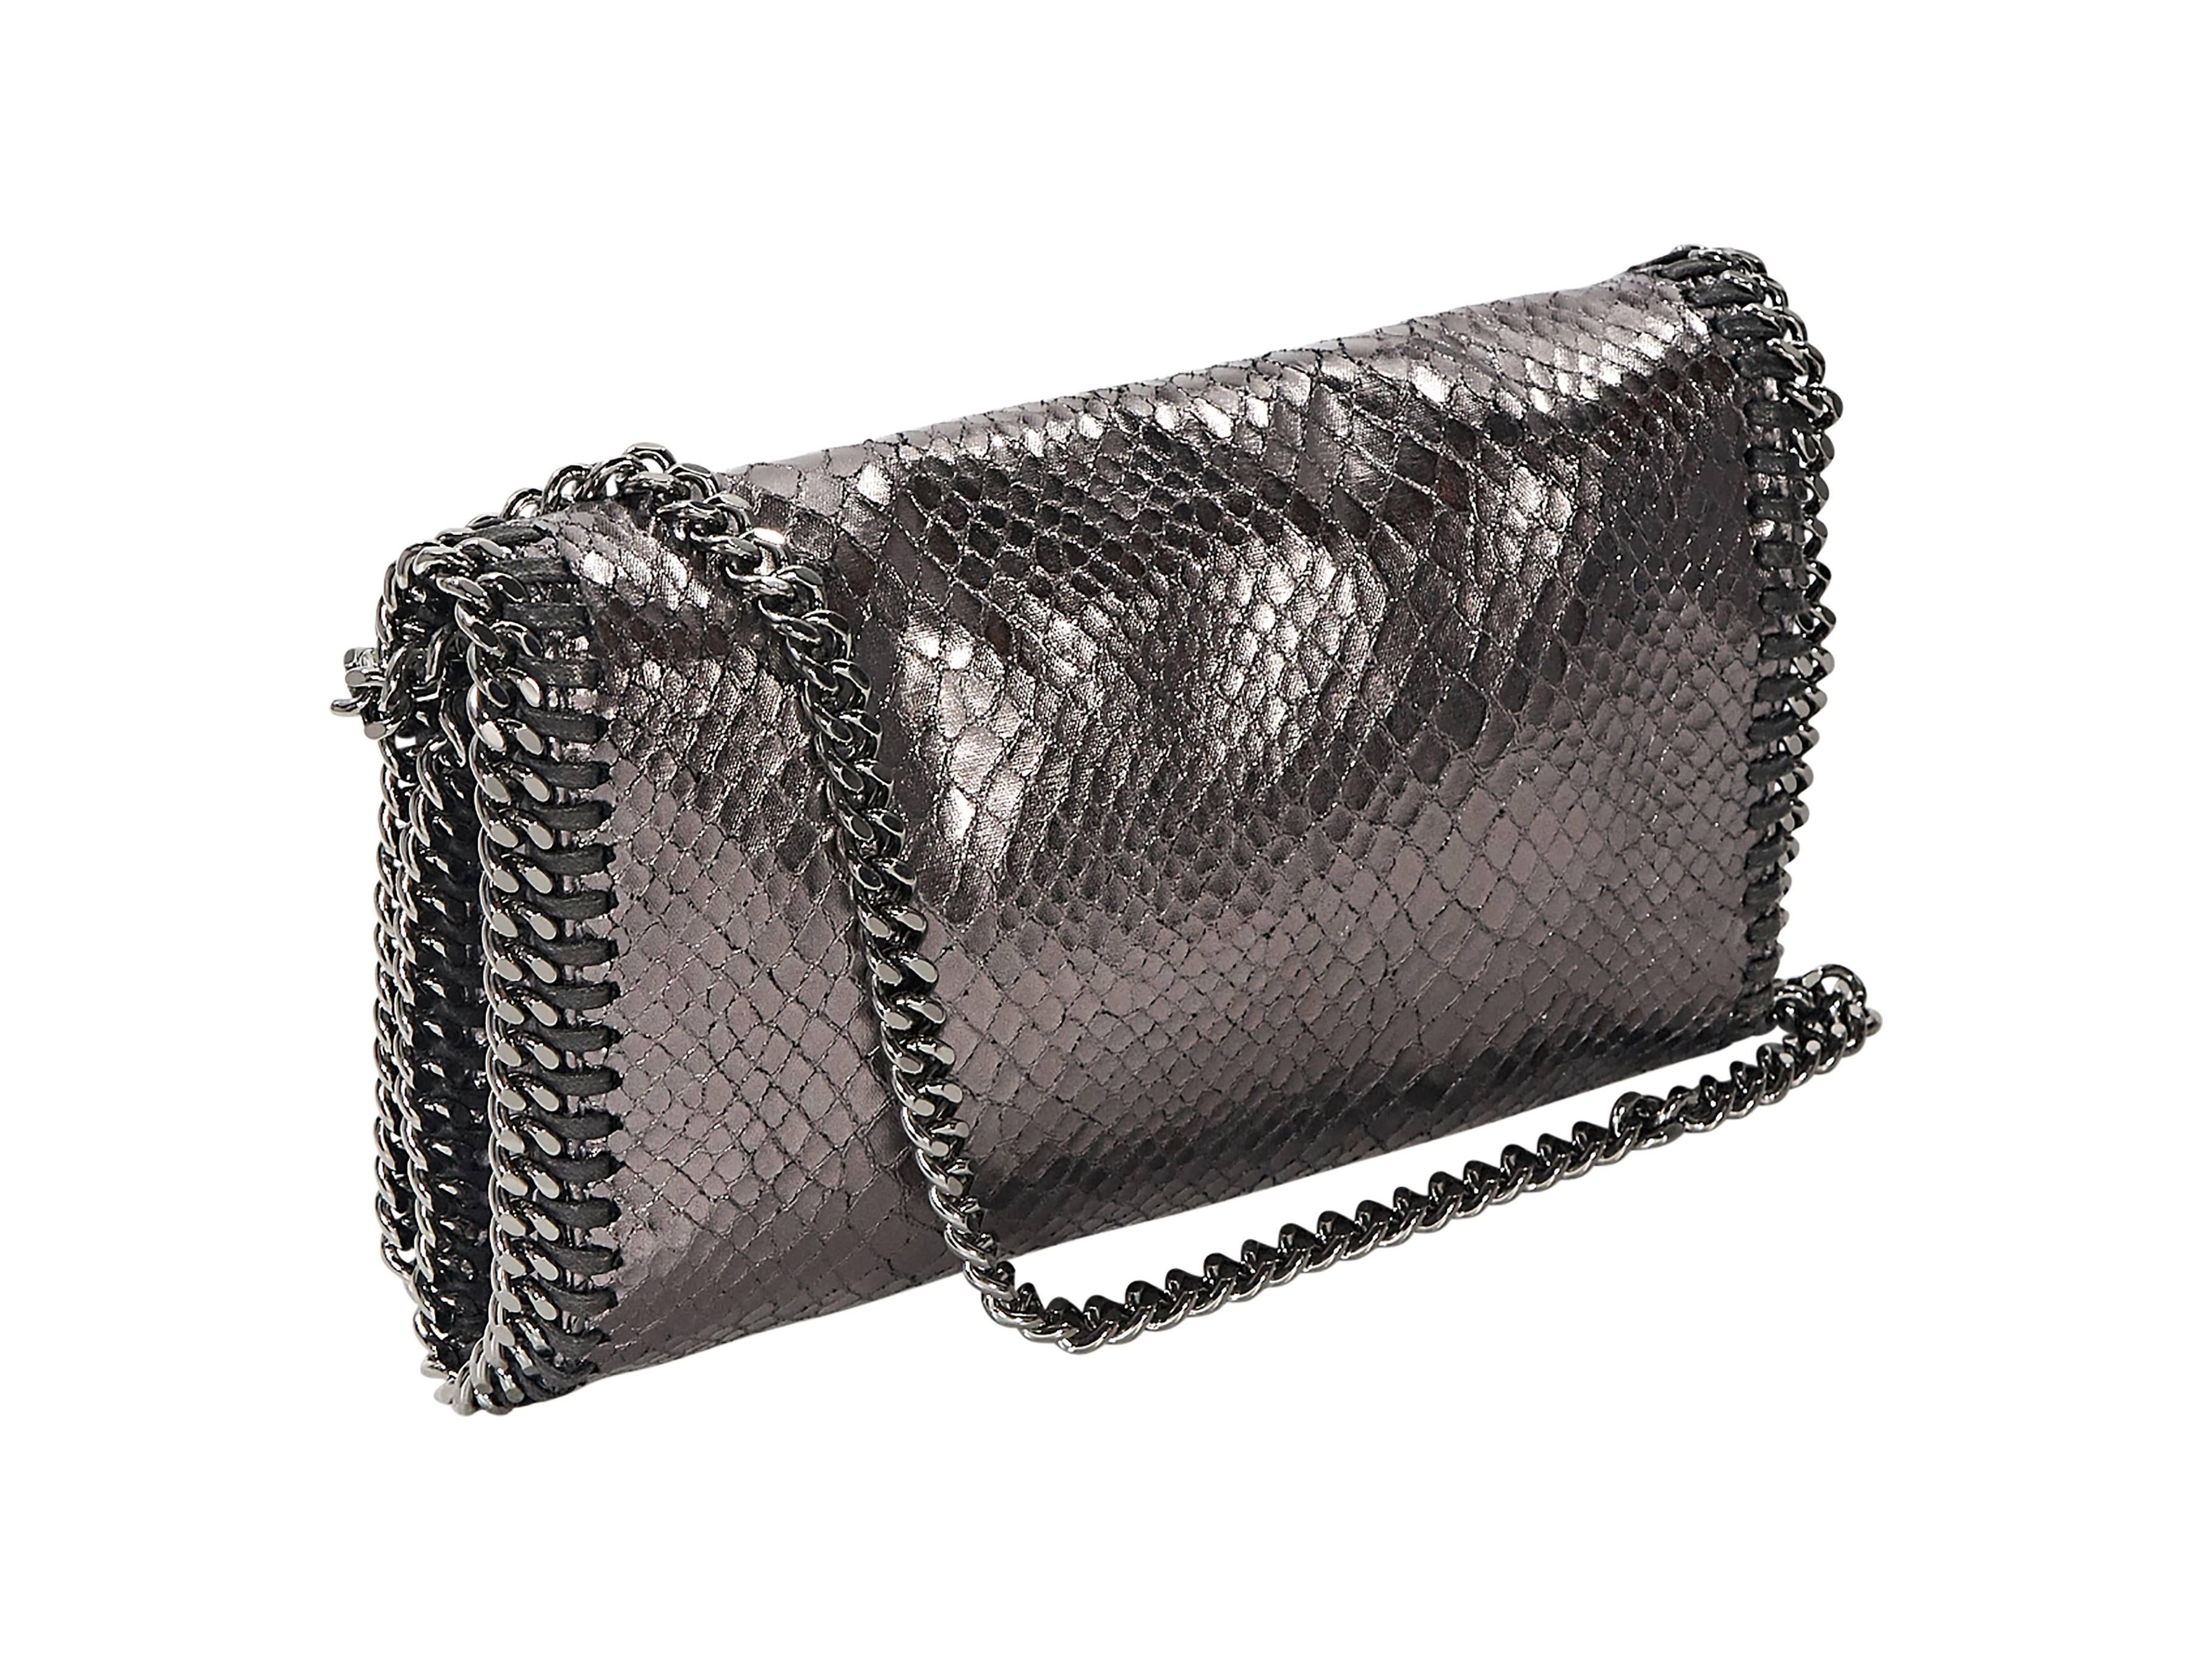 Product details:  ﻿Bronze embossed Falabella crossbody bag by Stella McCartney.  Chain crossbody strap.  Front flap.  Lined interior.  Silvertone hardware.  8.5